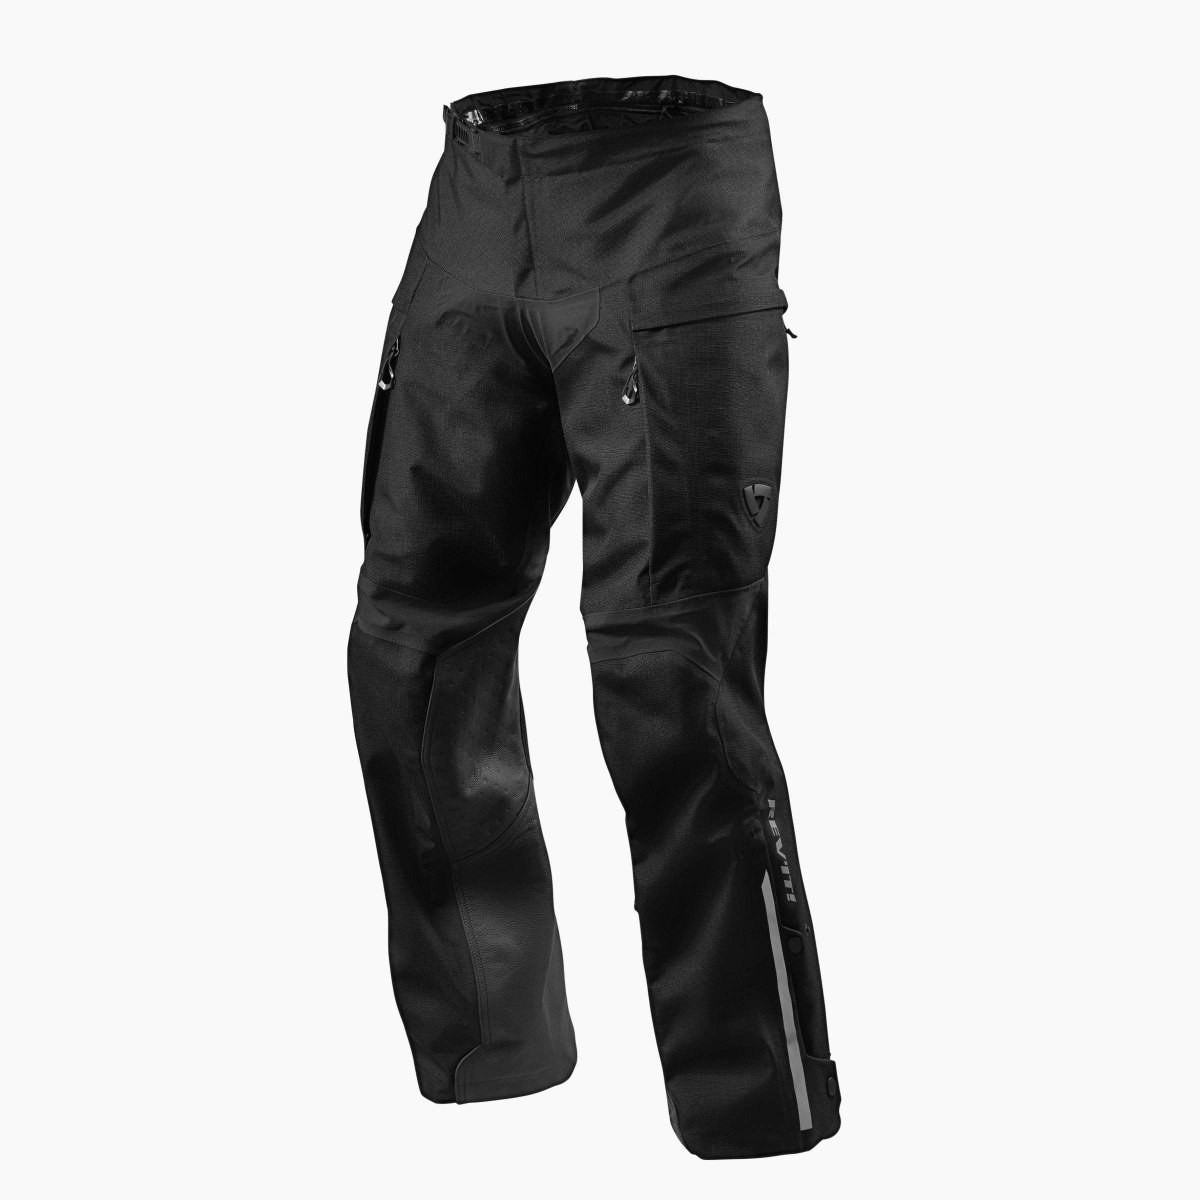 Image of REV'IT! Component H2O Standard Black Motorcycle Pants Size S ID 8700001317641